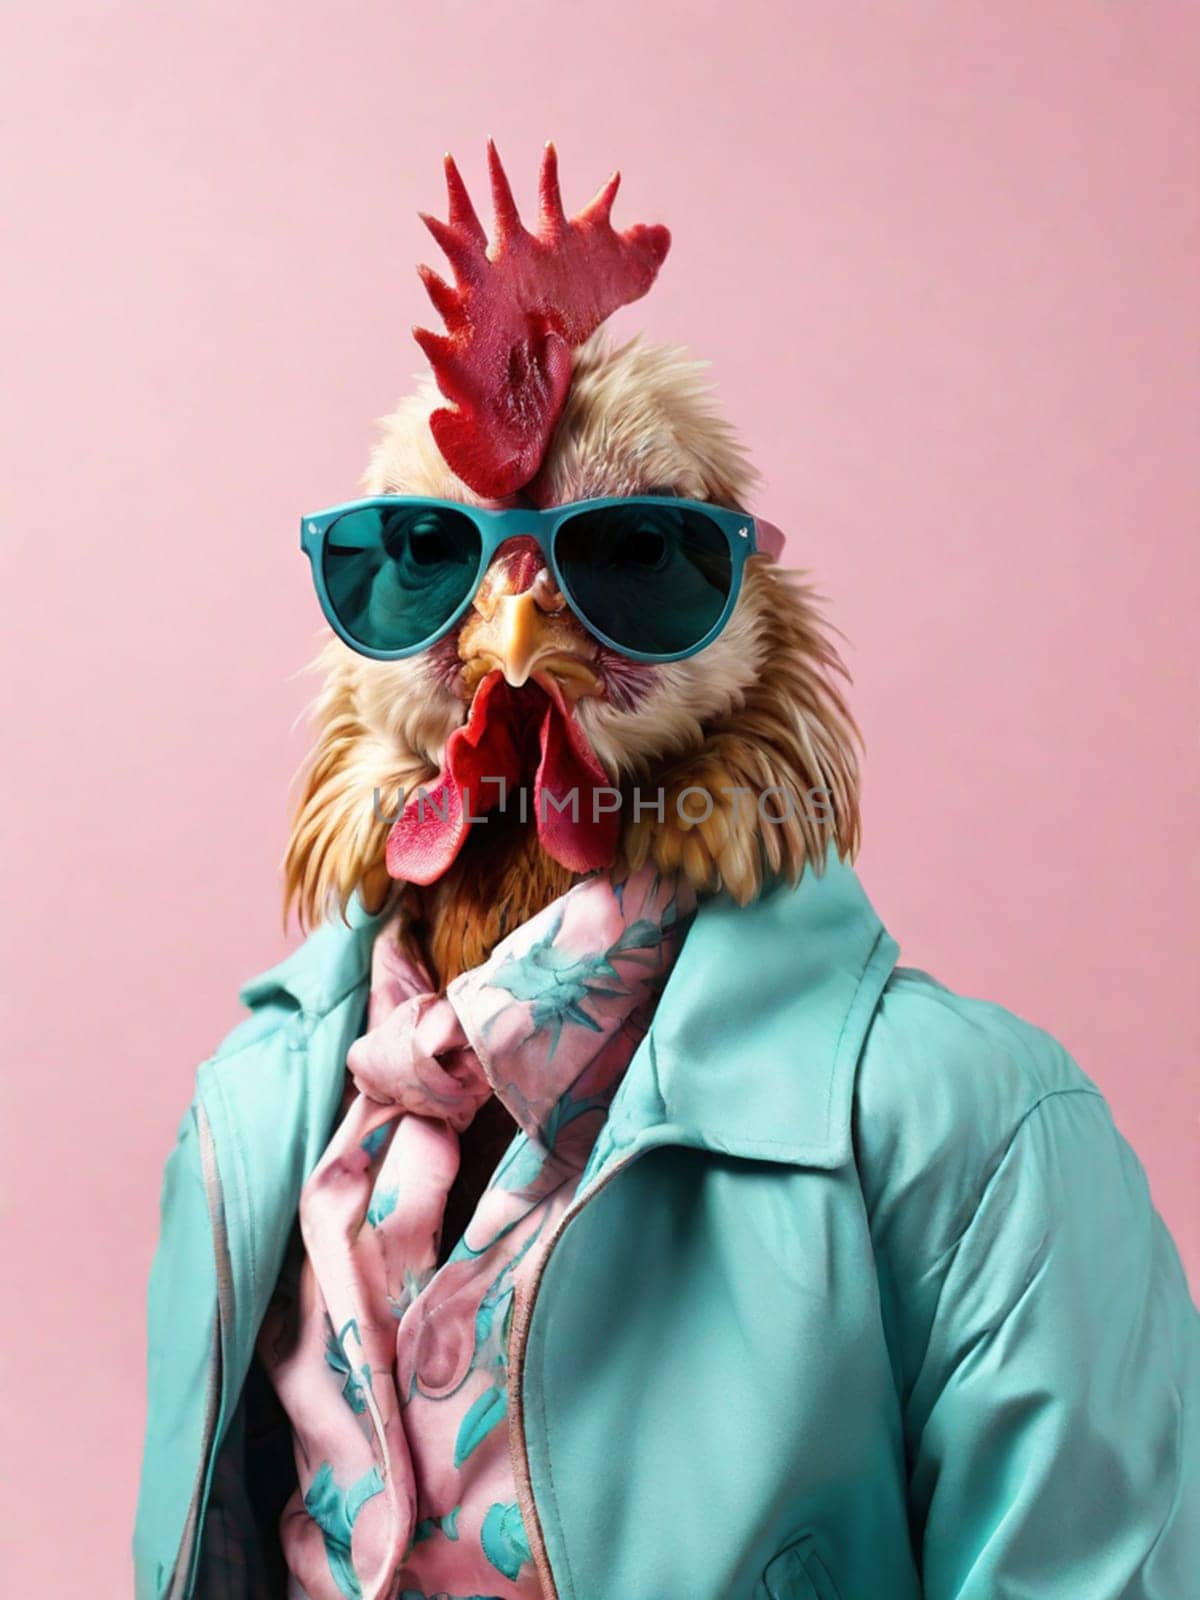 Fashionable rooster in sunglasses wearing a pink shirt and turquoise leather jacket on a pink background.